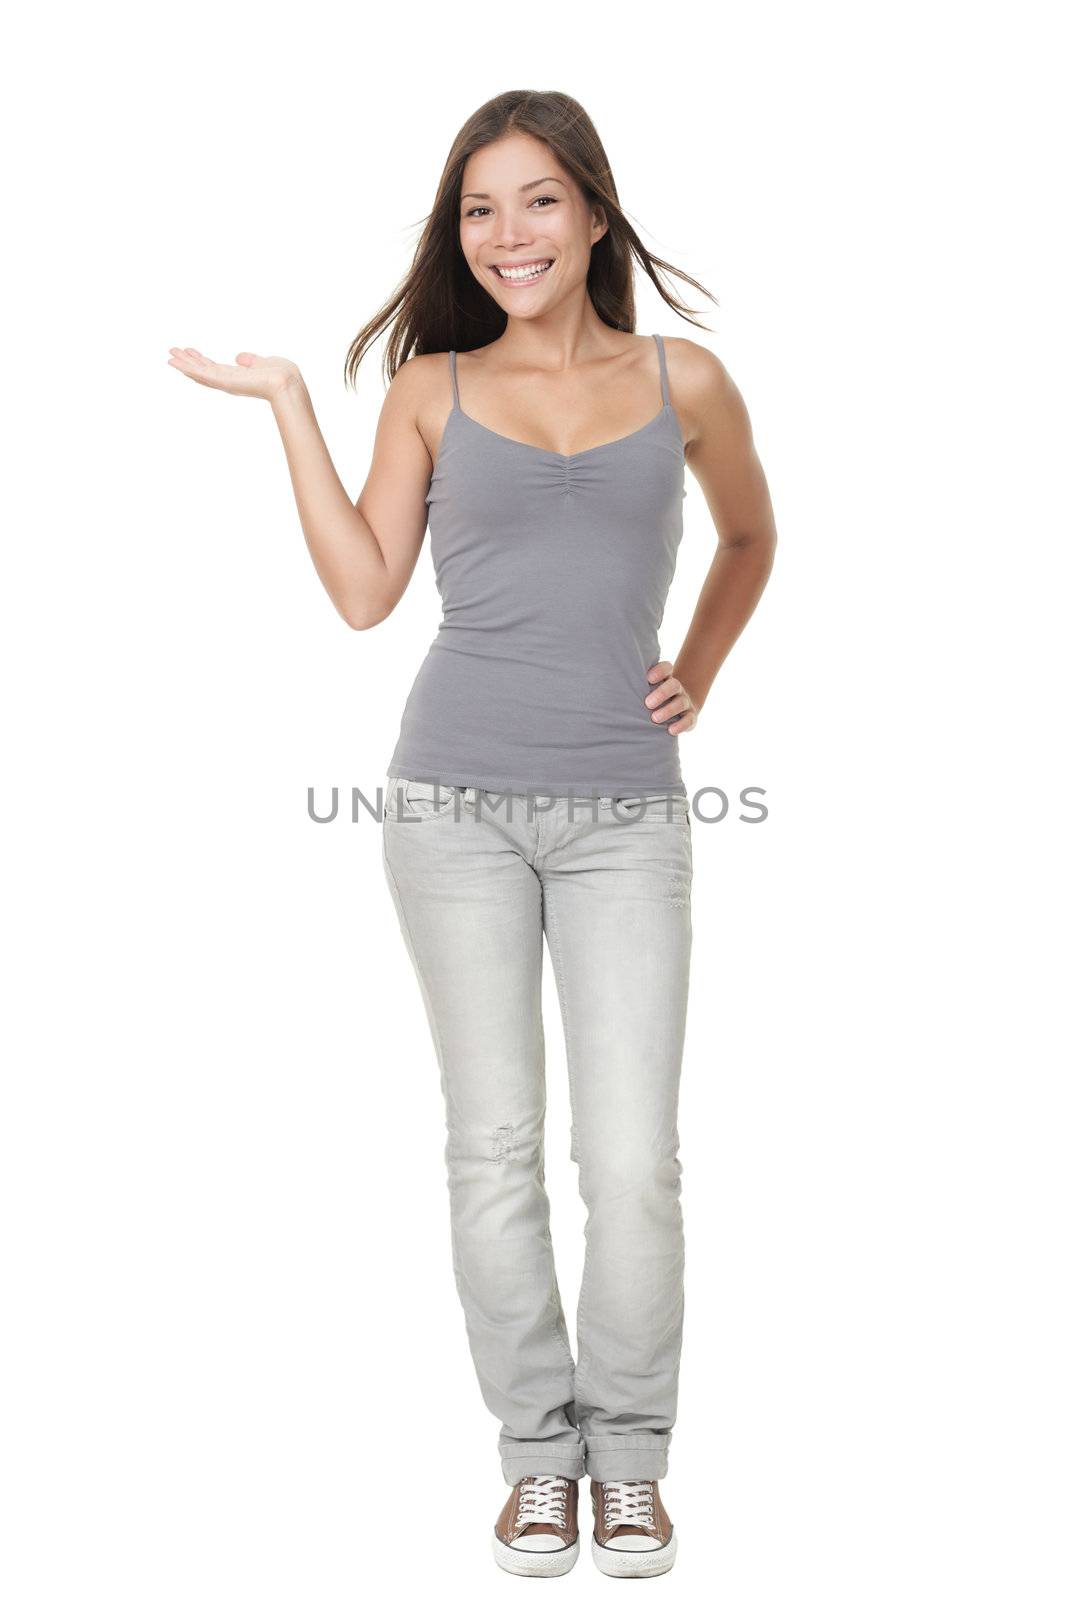 Cute female student presenting and showing copy space for product of text. Very fresh and smiling full body portrait of a beautiful mixed Chinese Asian / Caucasian young woman model standing isolated on white background.